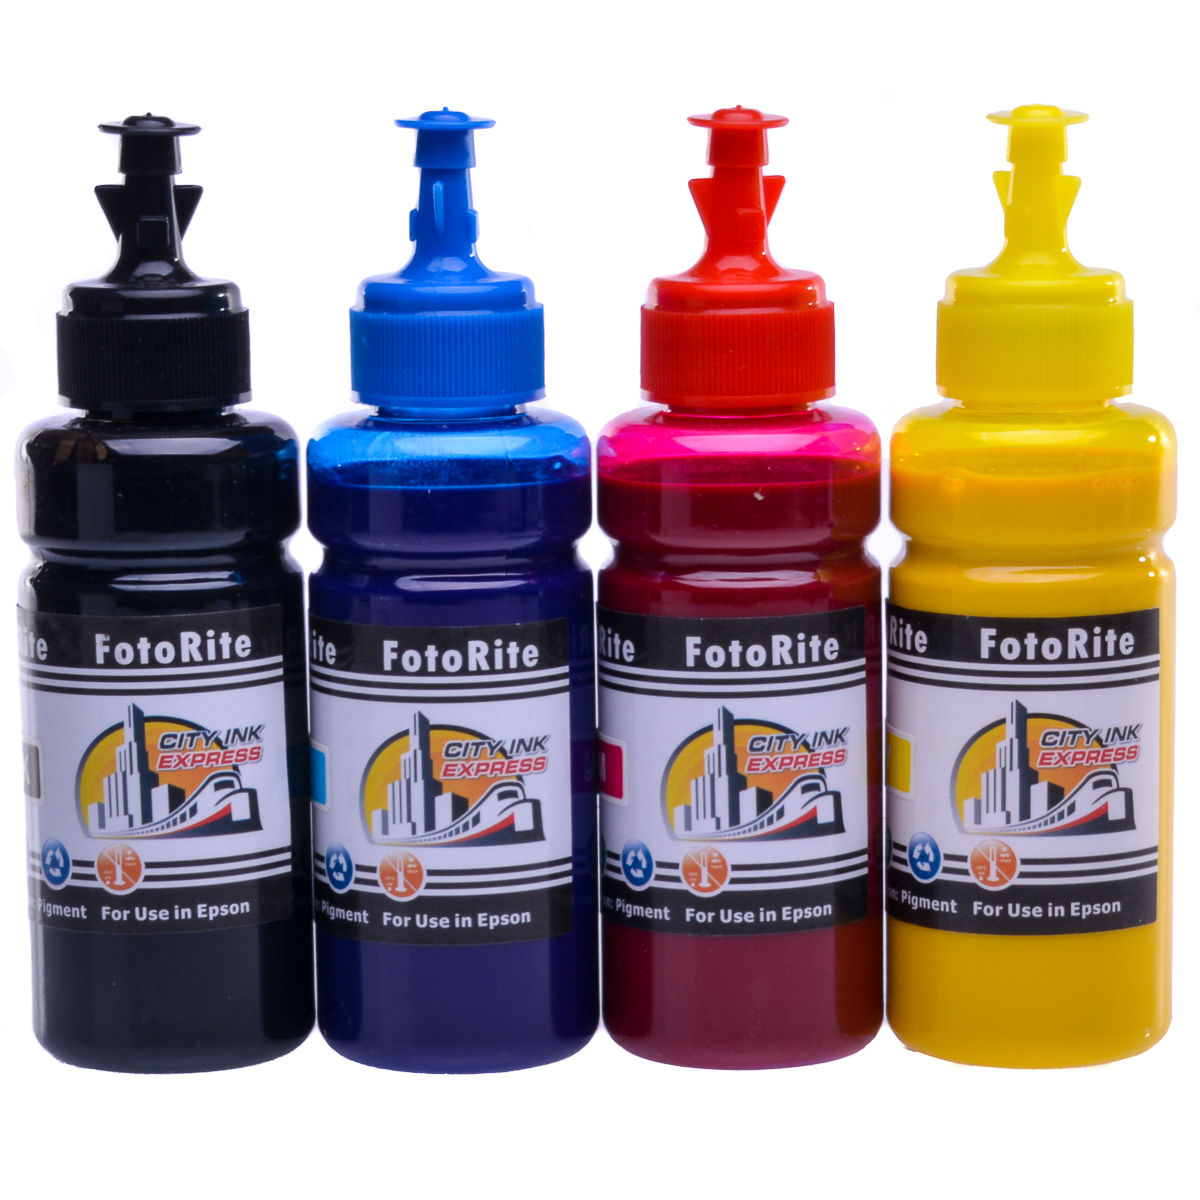 Cheap Multipack pigment ink refill replaces Epson XP-4200